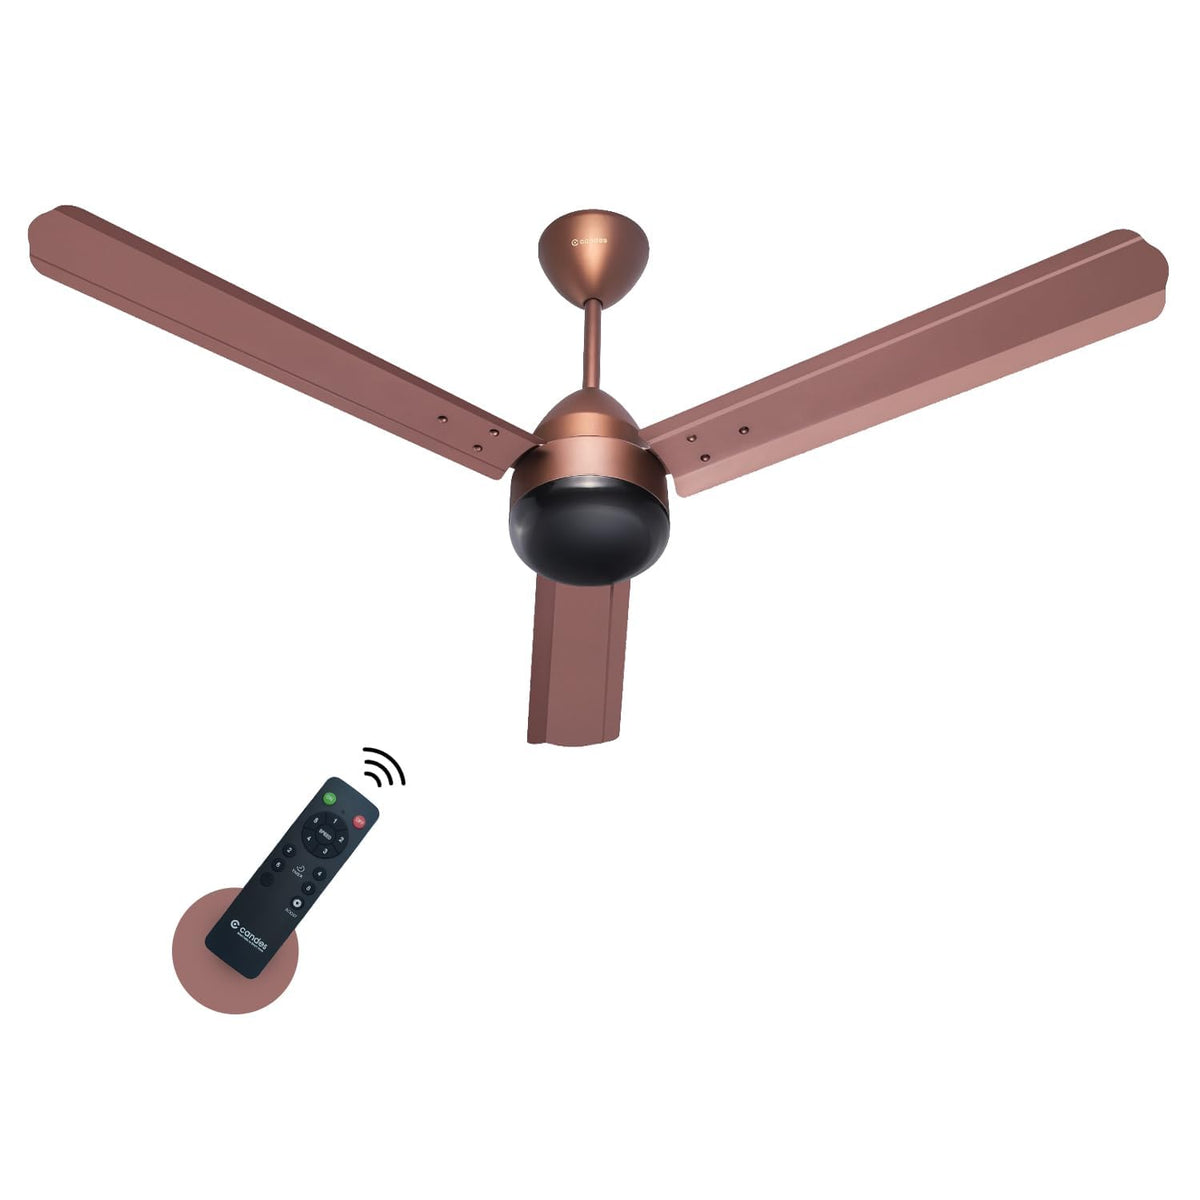 Candes Majestic Energy Saving 1200 mm / 48 inch Anti-Rust BLDC Ceiling Fan with Remote (2 Years Warranty) - Rusty Brown & Black